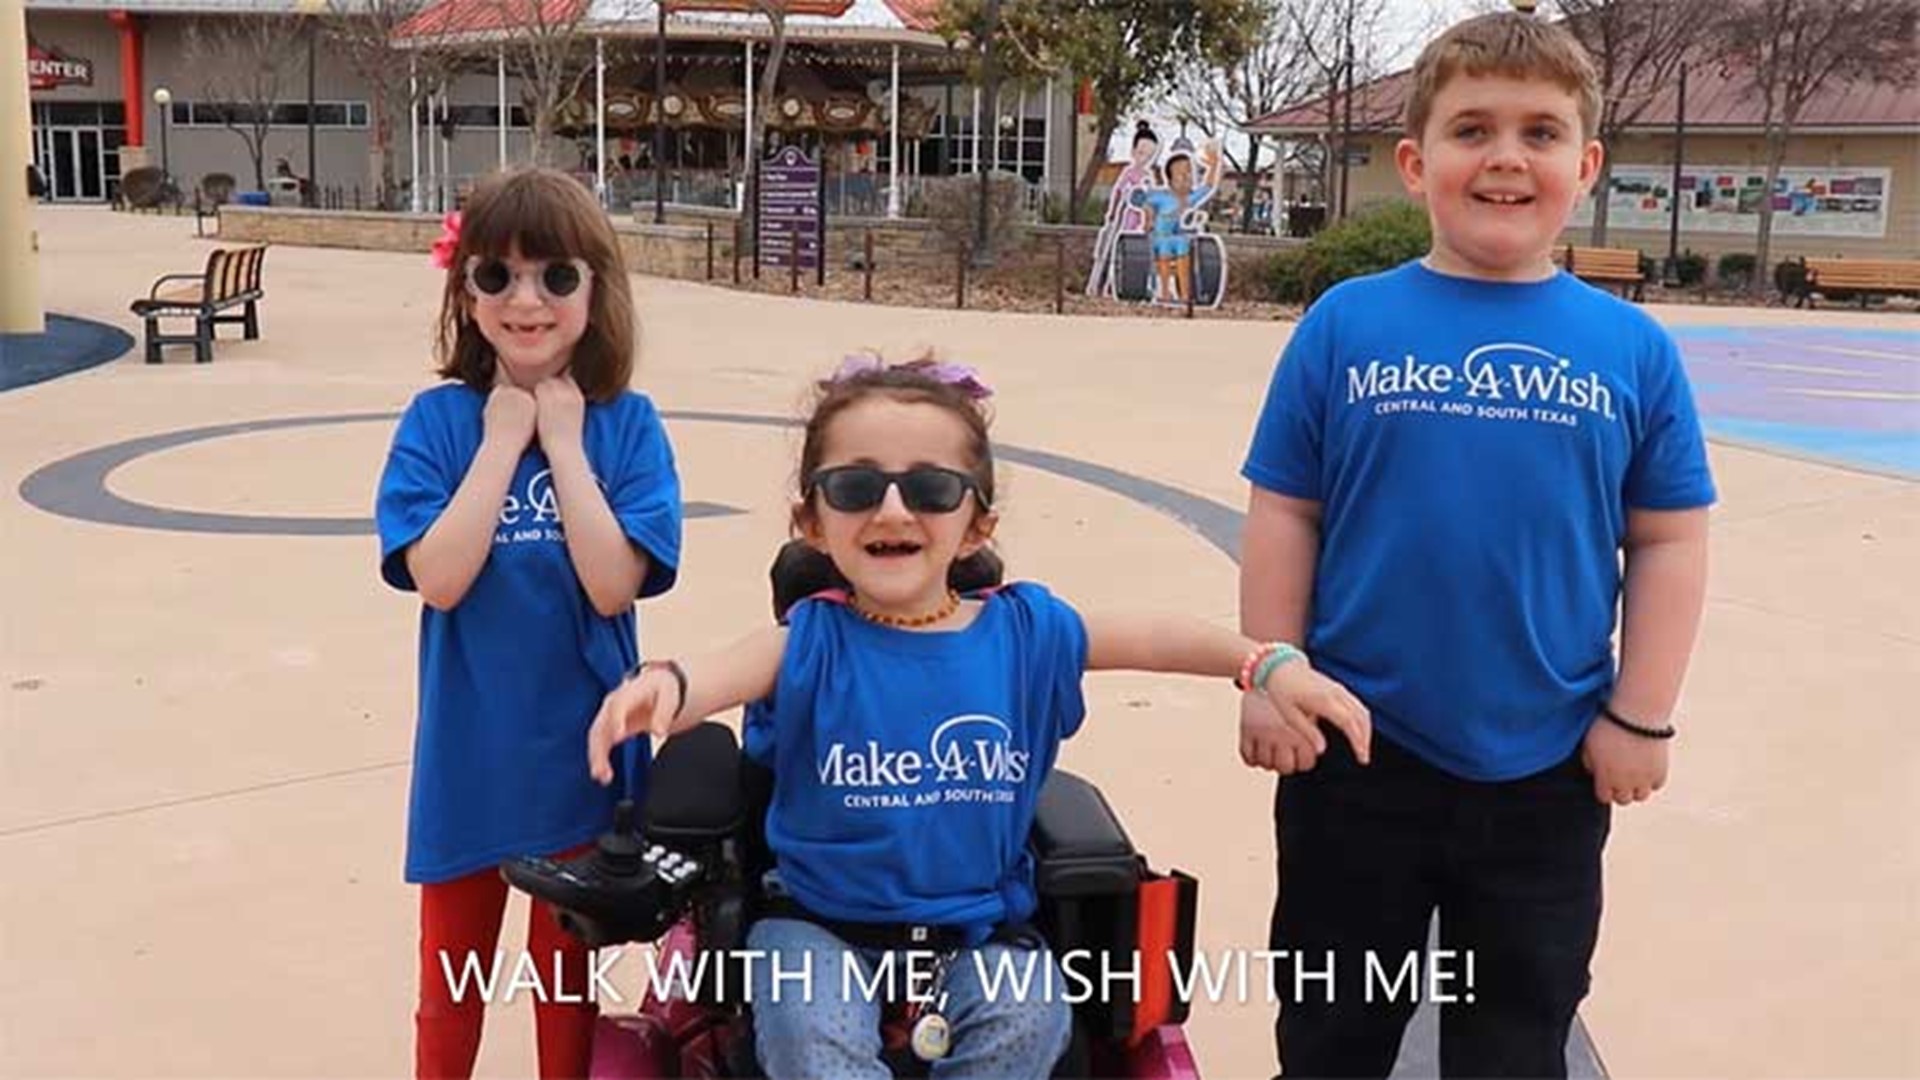 Going virtual also makes it possible to celebrate the Make-A-Wish mission with even more people in the community.